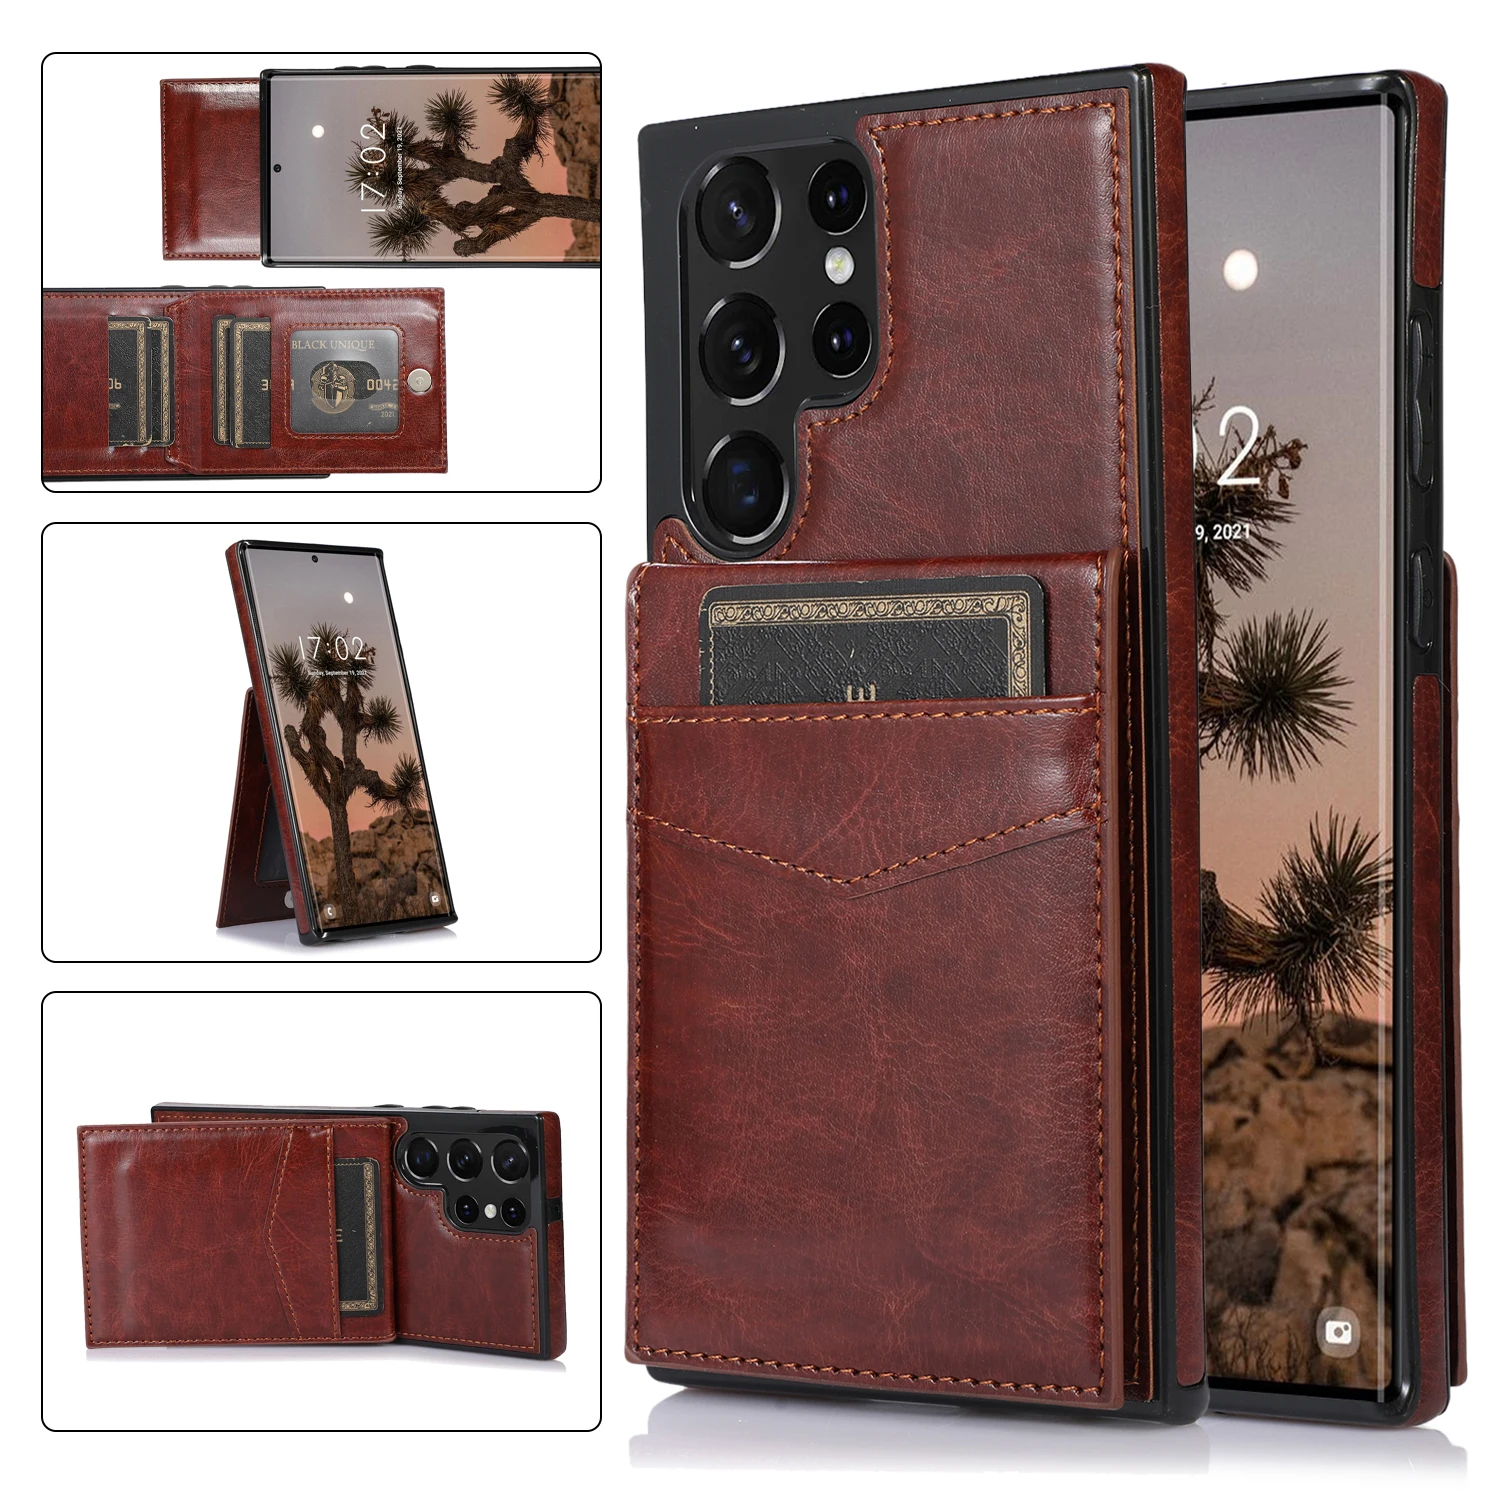 

Leather Flip Phone Cover For Samsung S22 Ultra S21 S20 FE S10 S9 S8 Plus Note20 Note10 Lite Note9 Note8 Wallet Card Slots Case